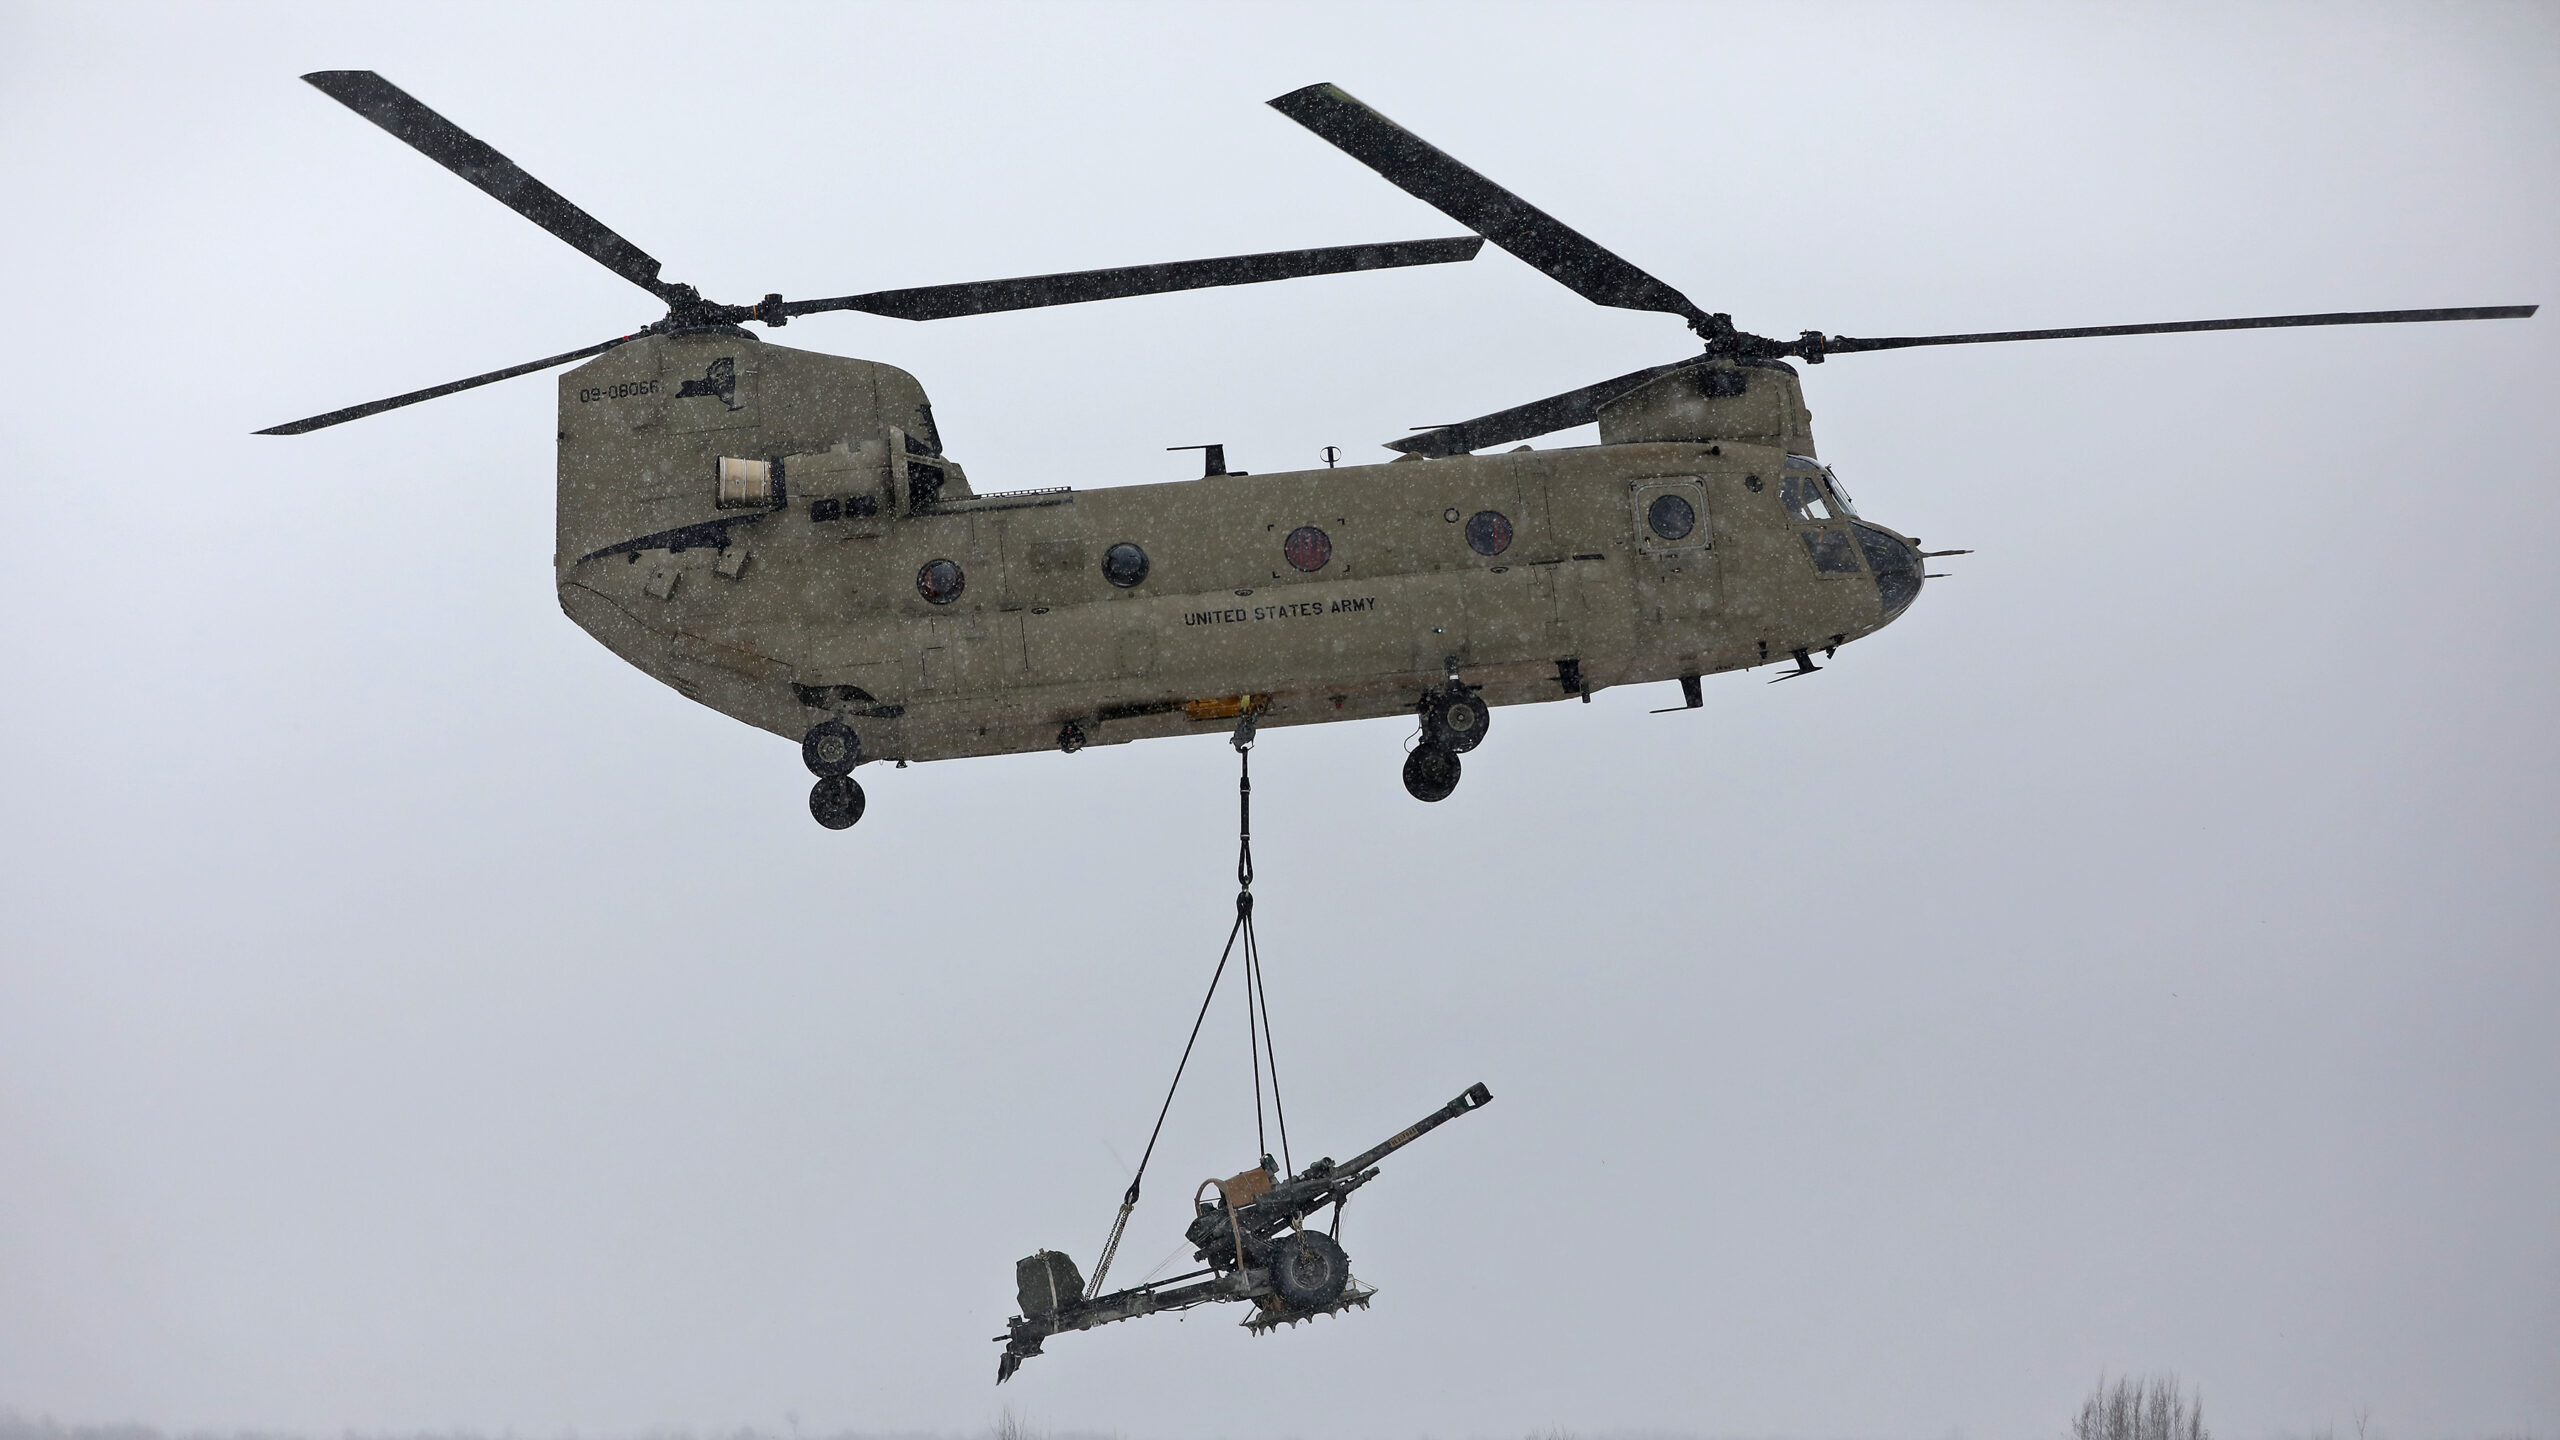 After engine fire incidents, ‘above 90 percent’ of all Chinooks are fixed